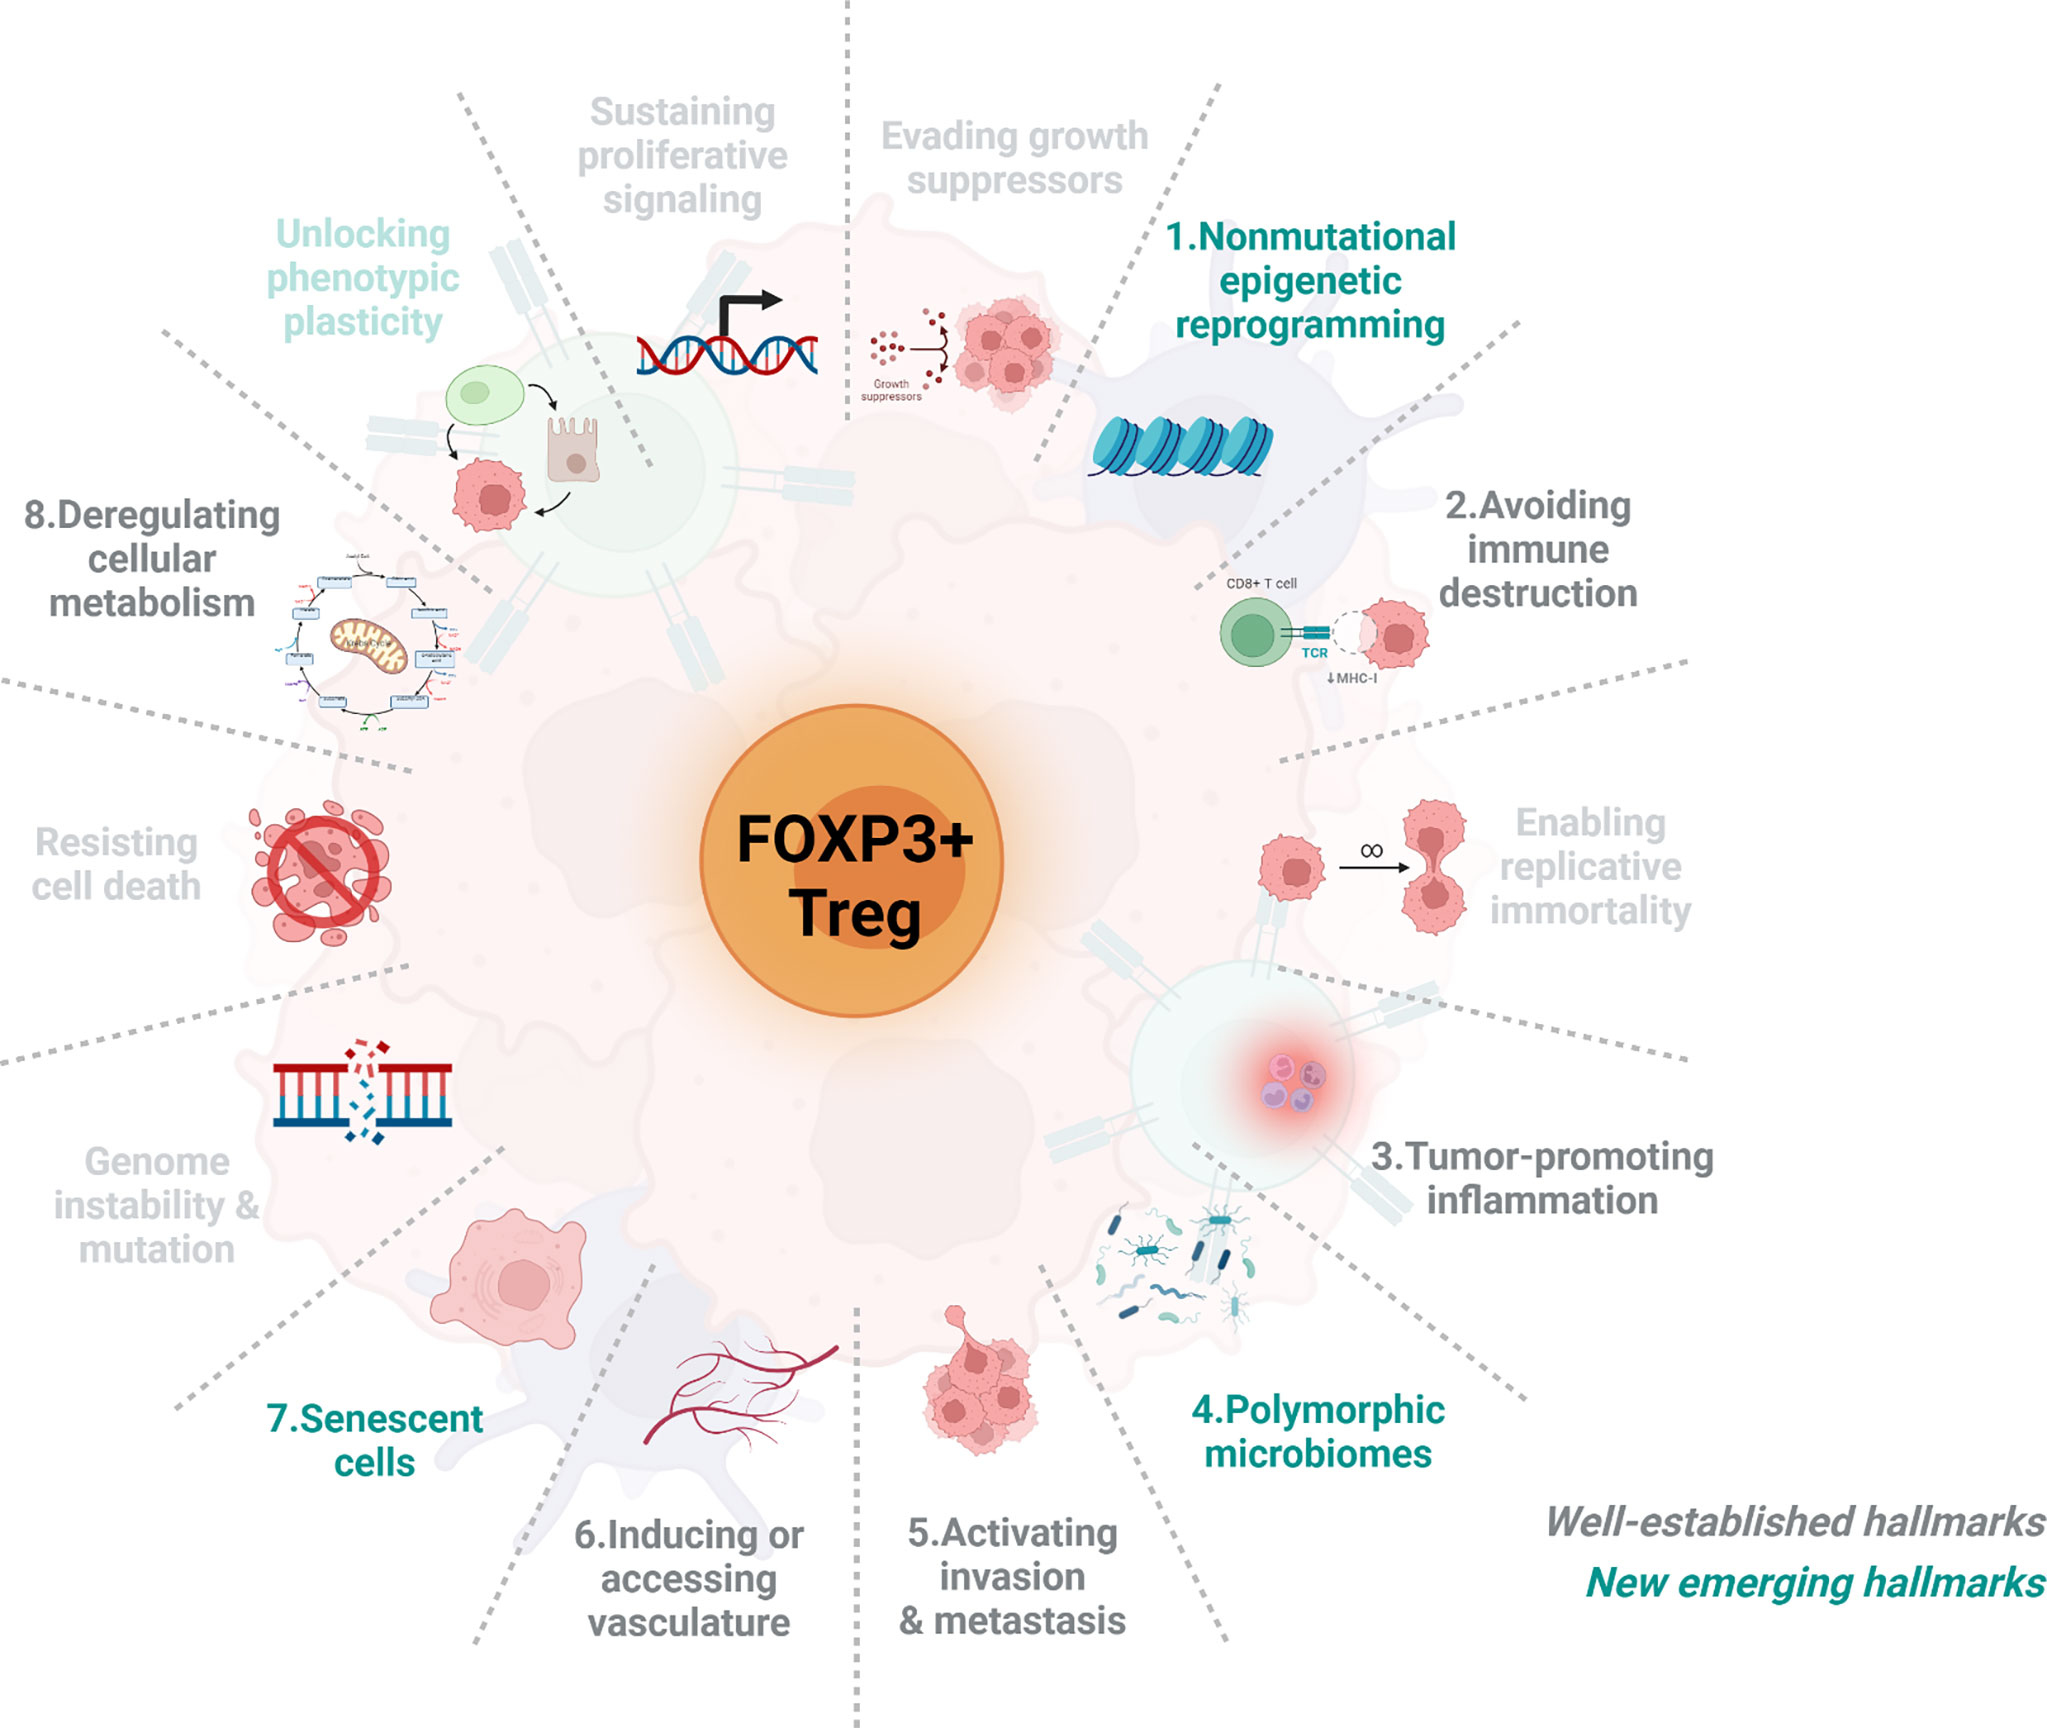 Frontiers | FOXP3+ regulatory T cells and the immune escape in 